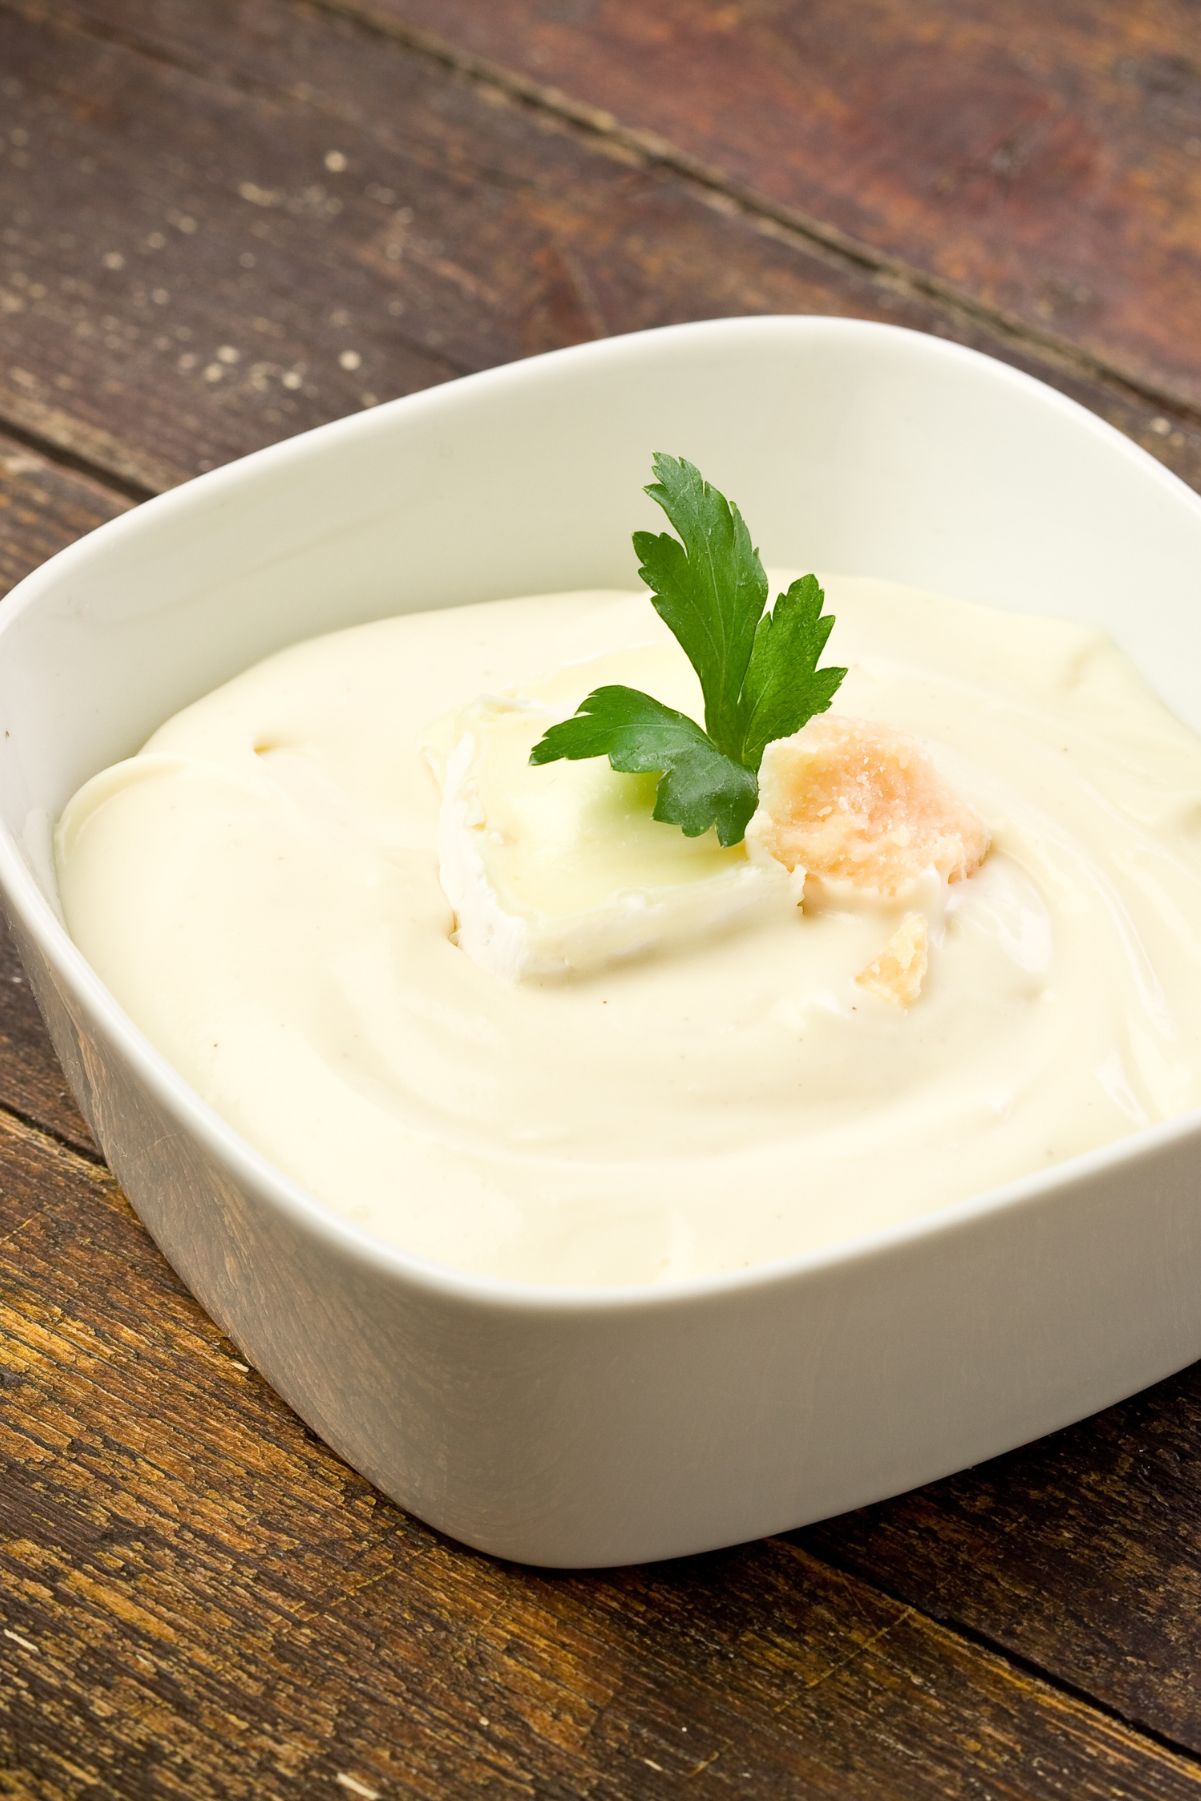 Closeup of Copycat Olive Garden Alfredo Sauce in a white, bowl on a rustic wooden surface.